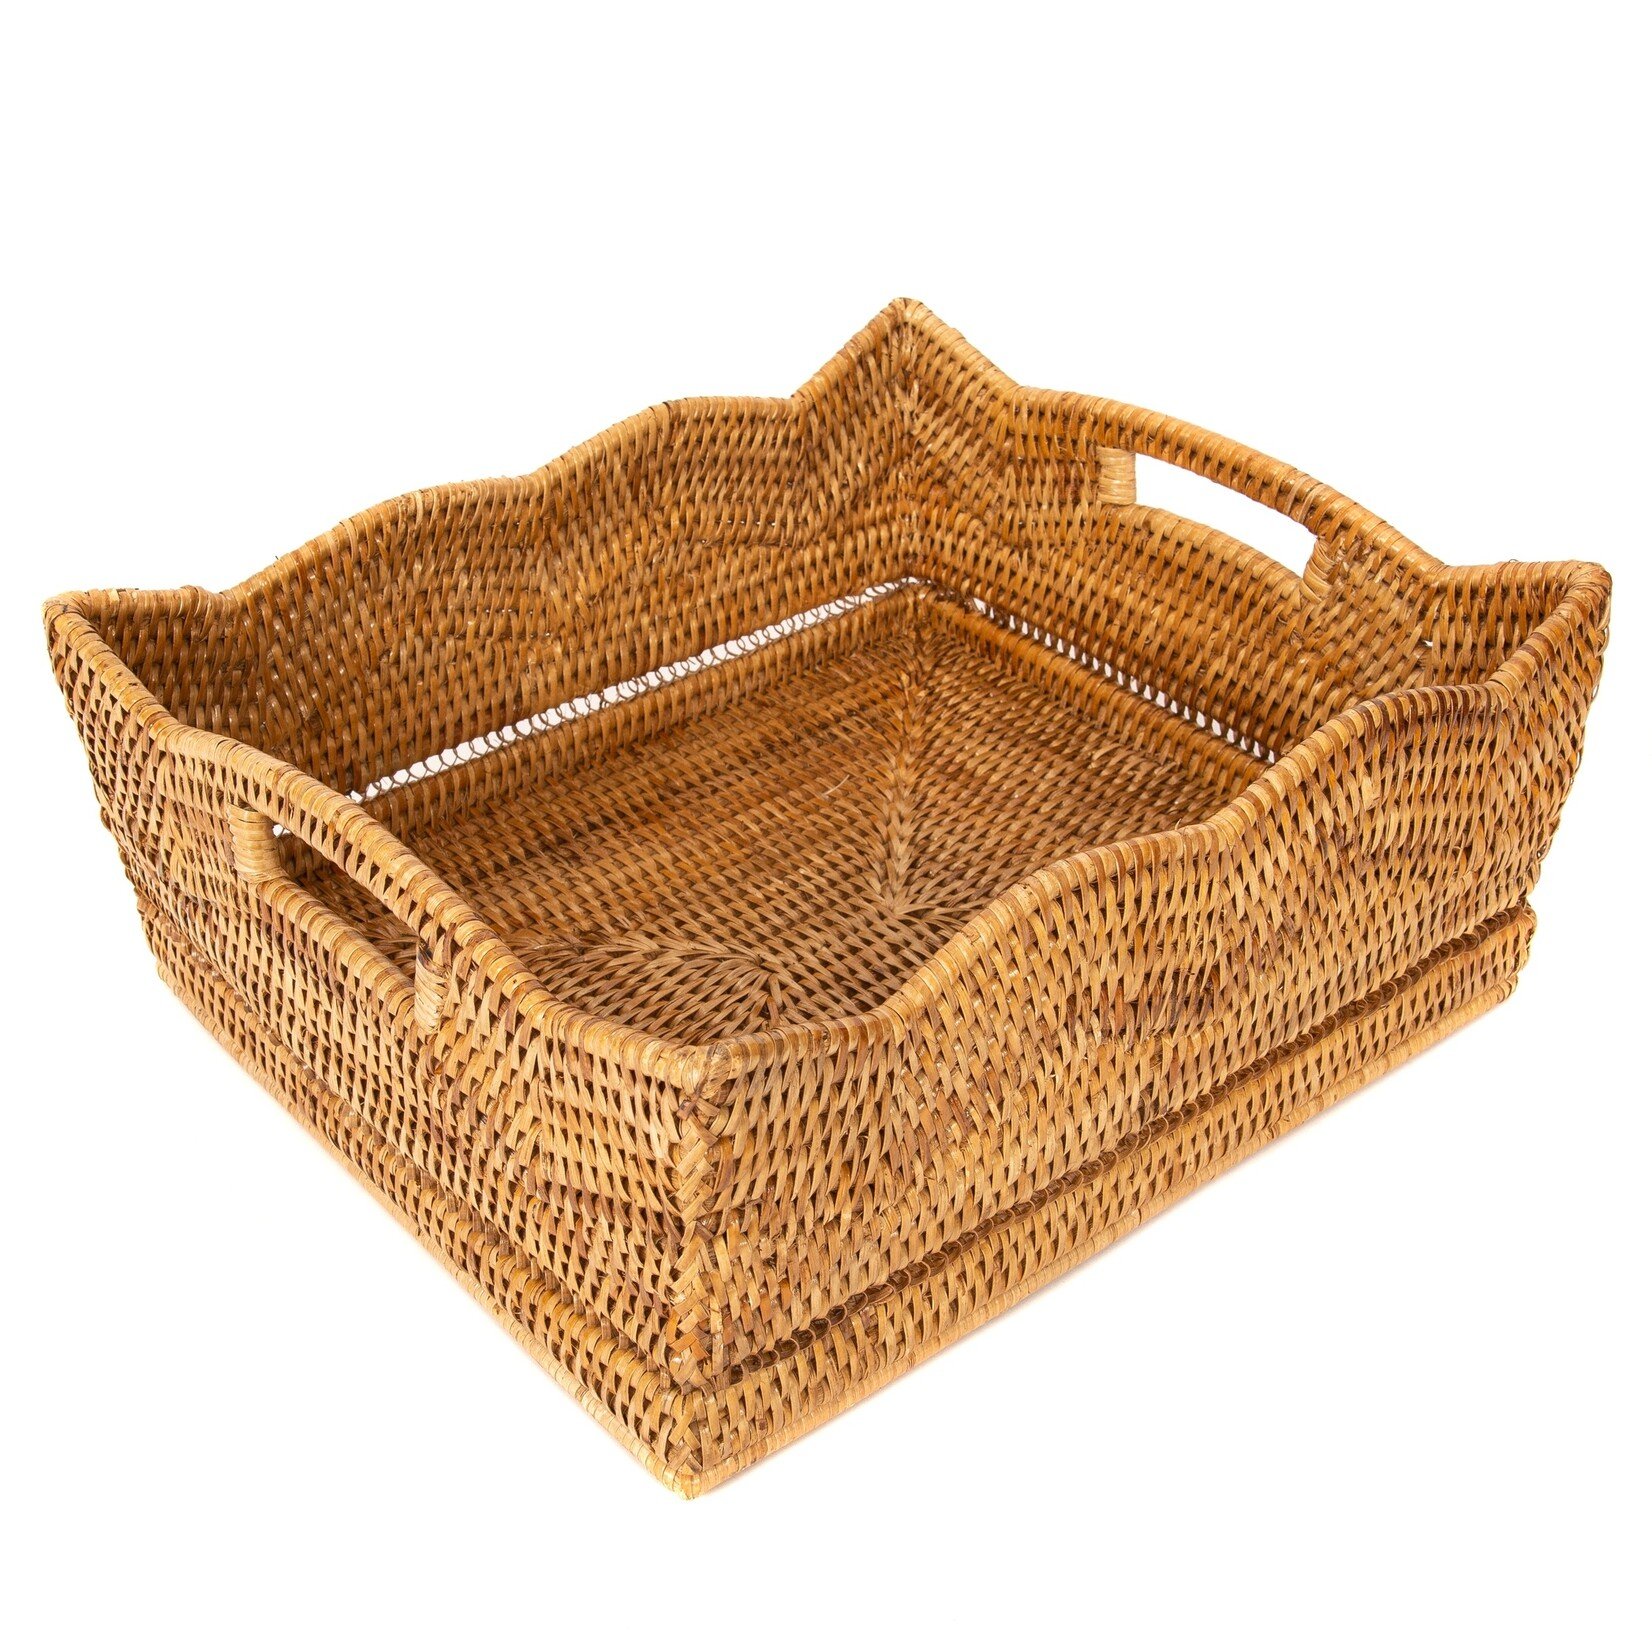 Artifacts Trading Company Scalloped Rattan Baskets